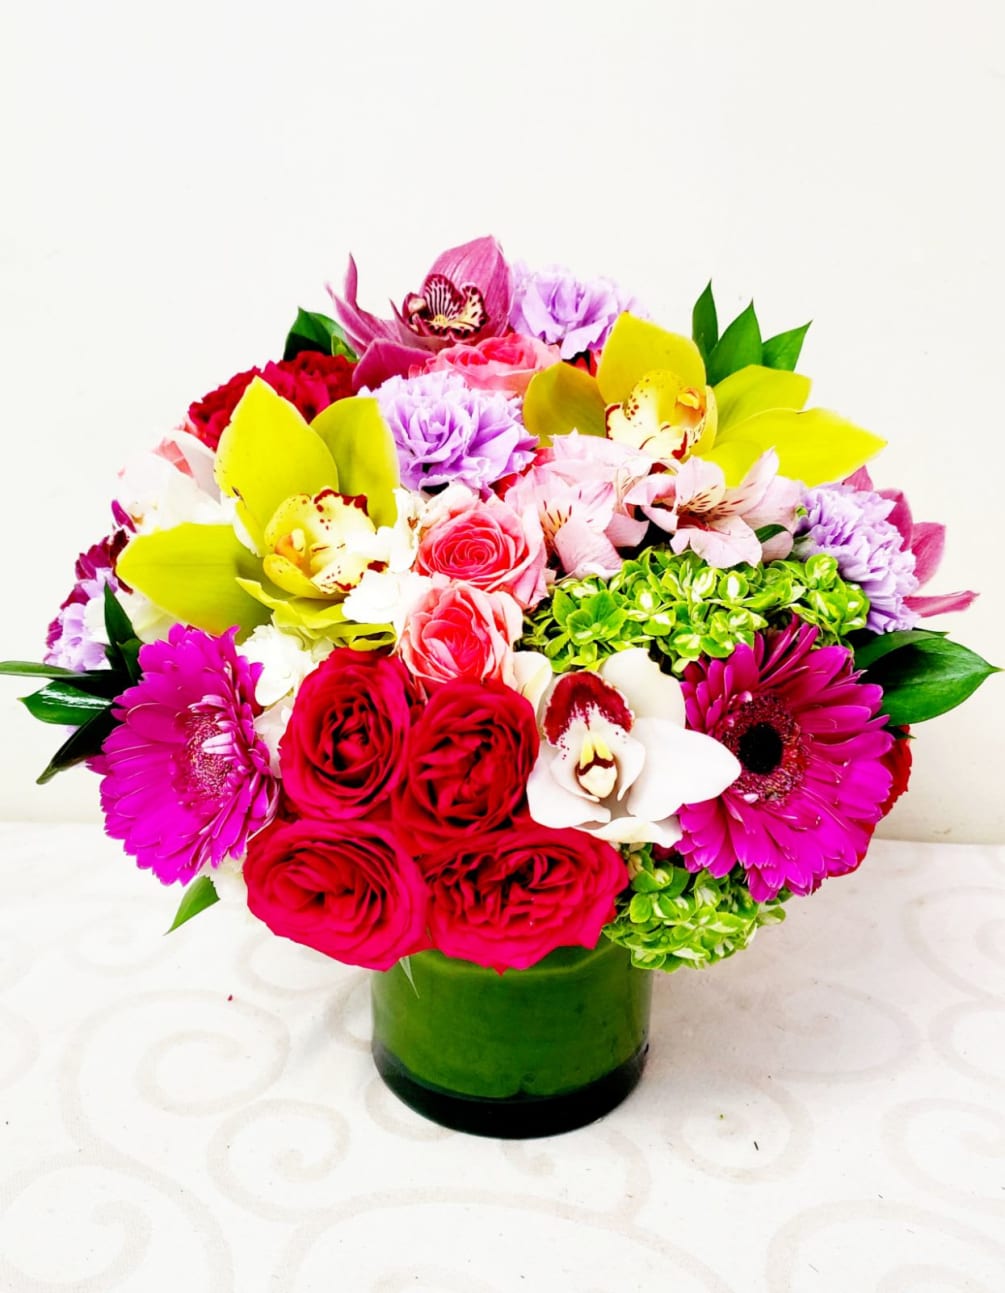 Wow her with this elegant and vibrant floral gift. The collaboration of